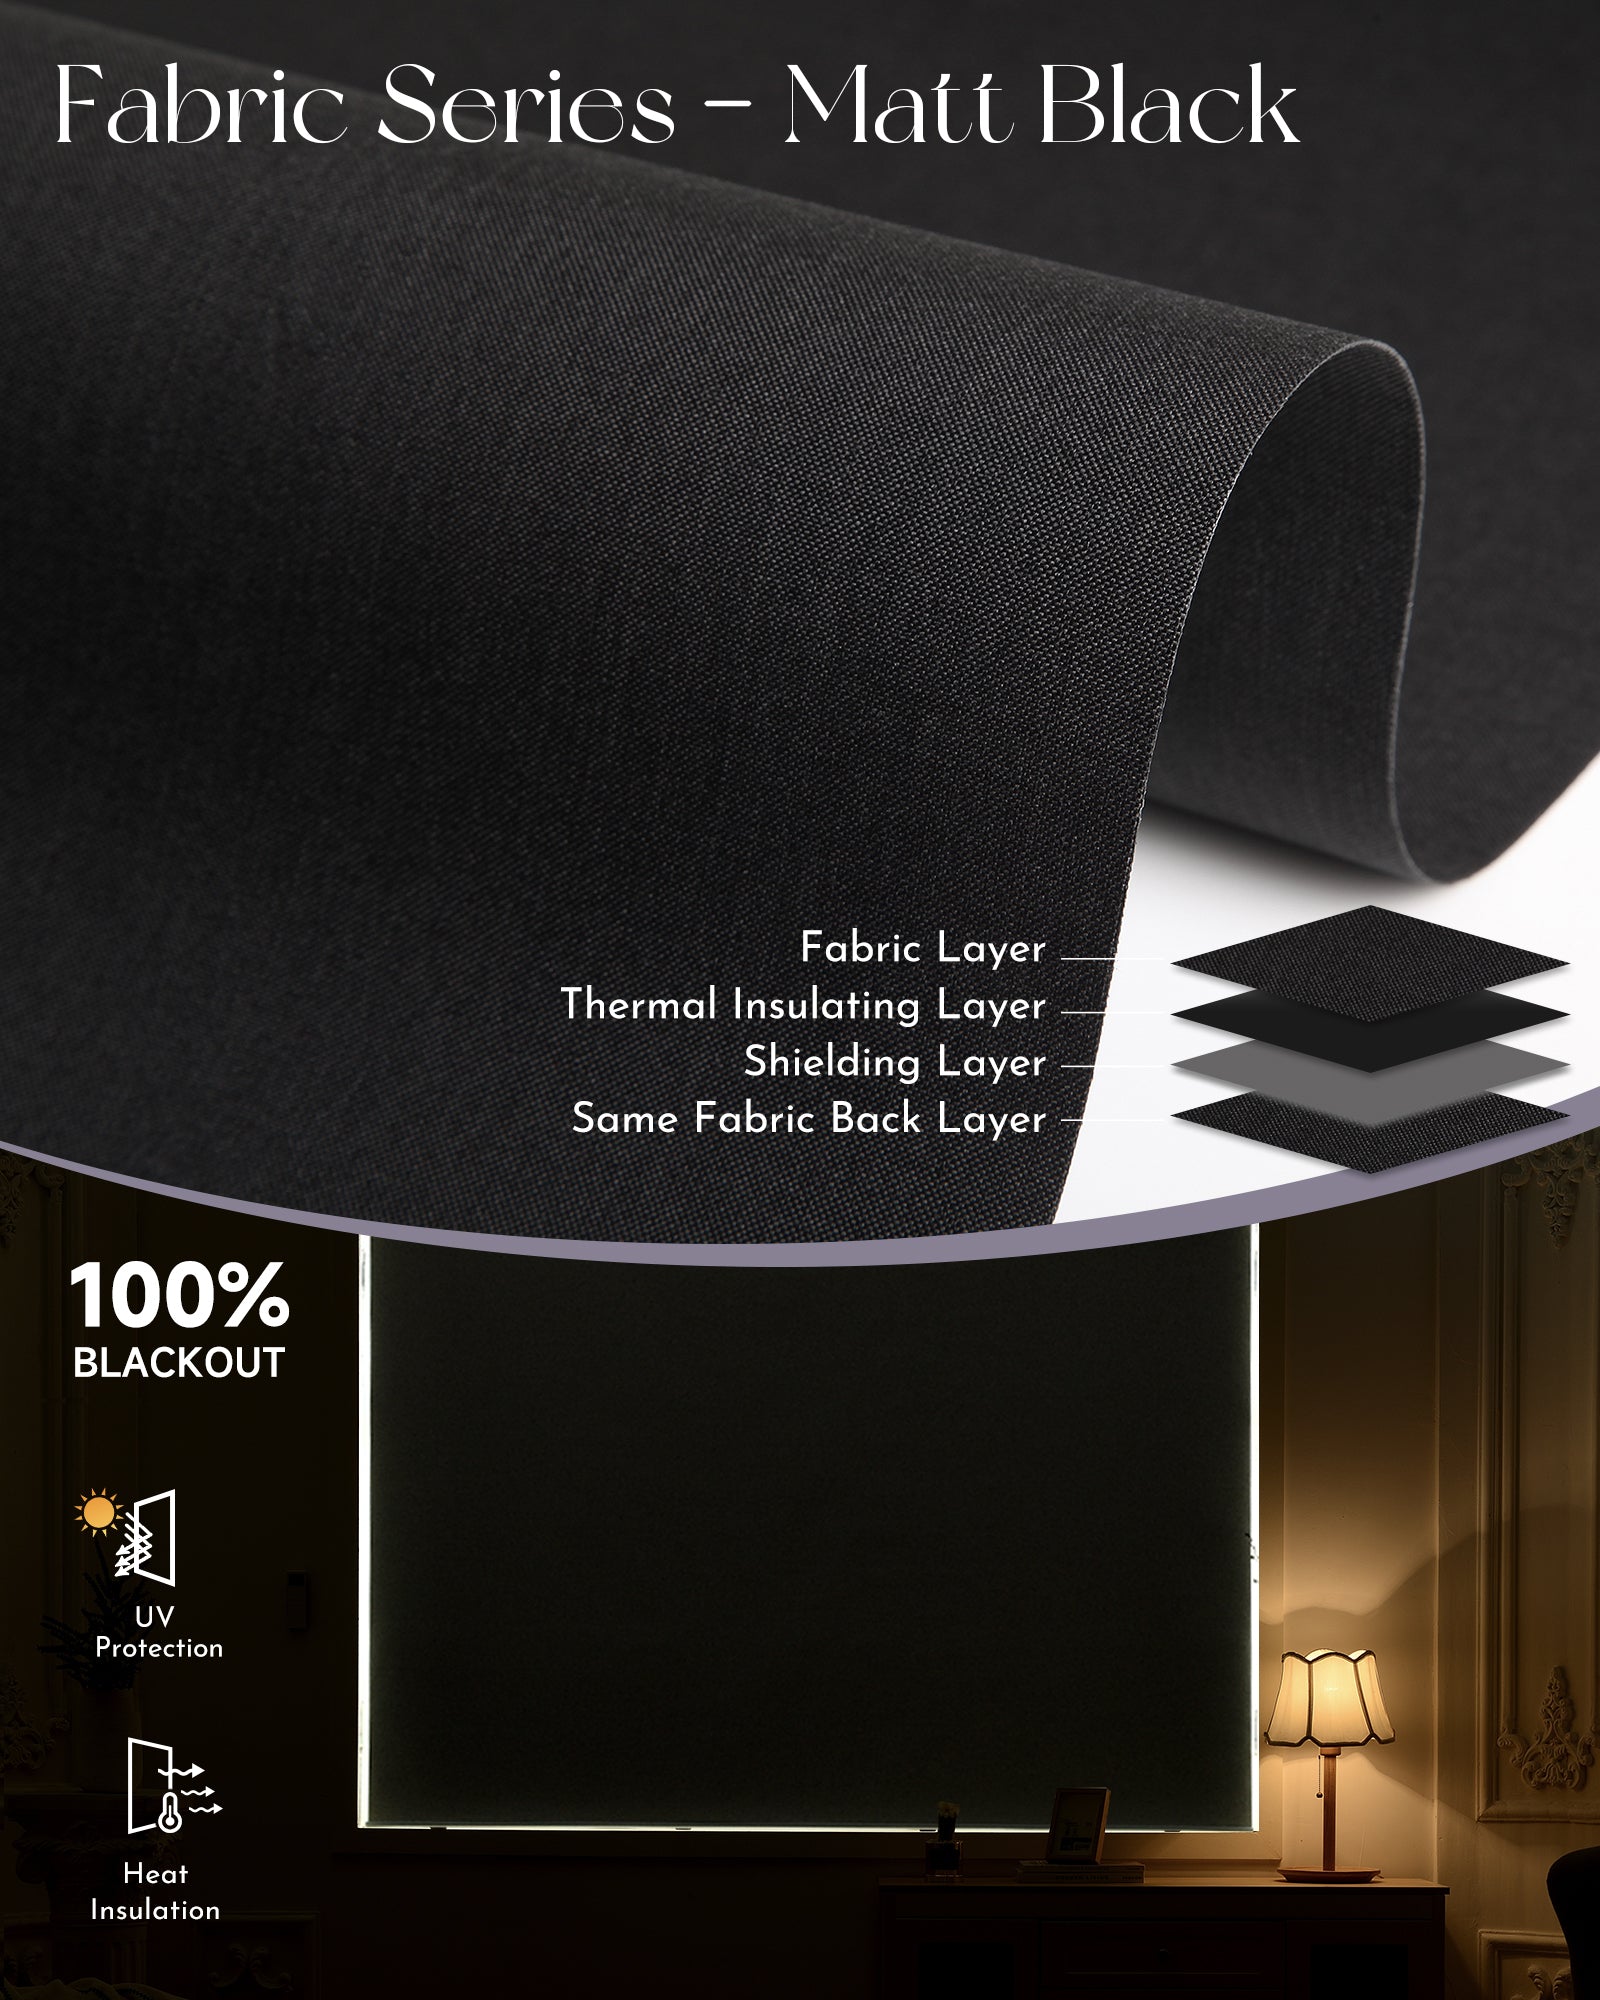 High-quality blackout fabrics, offer absolute privacy & energy saving. Ideal indoor window treatments for bedroom, living room, patio sliding door and media room etc.